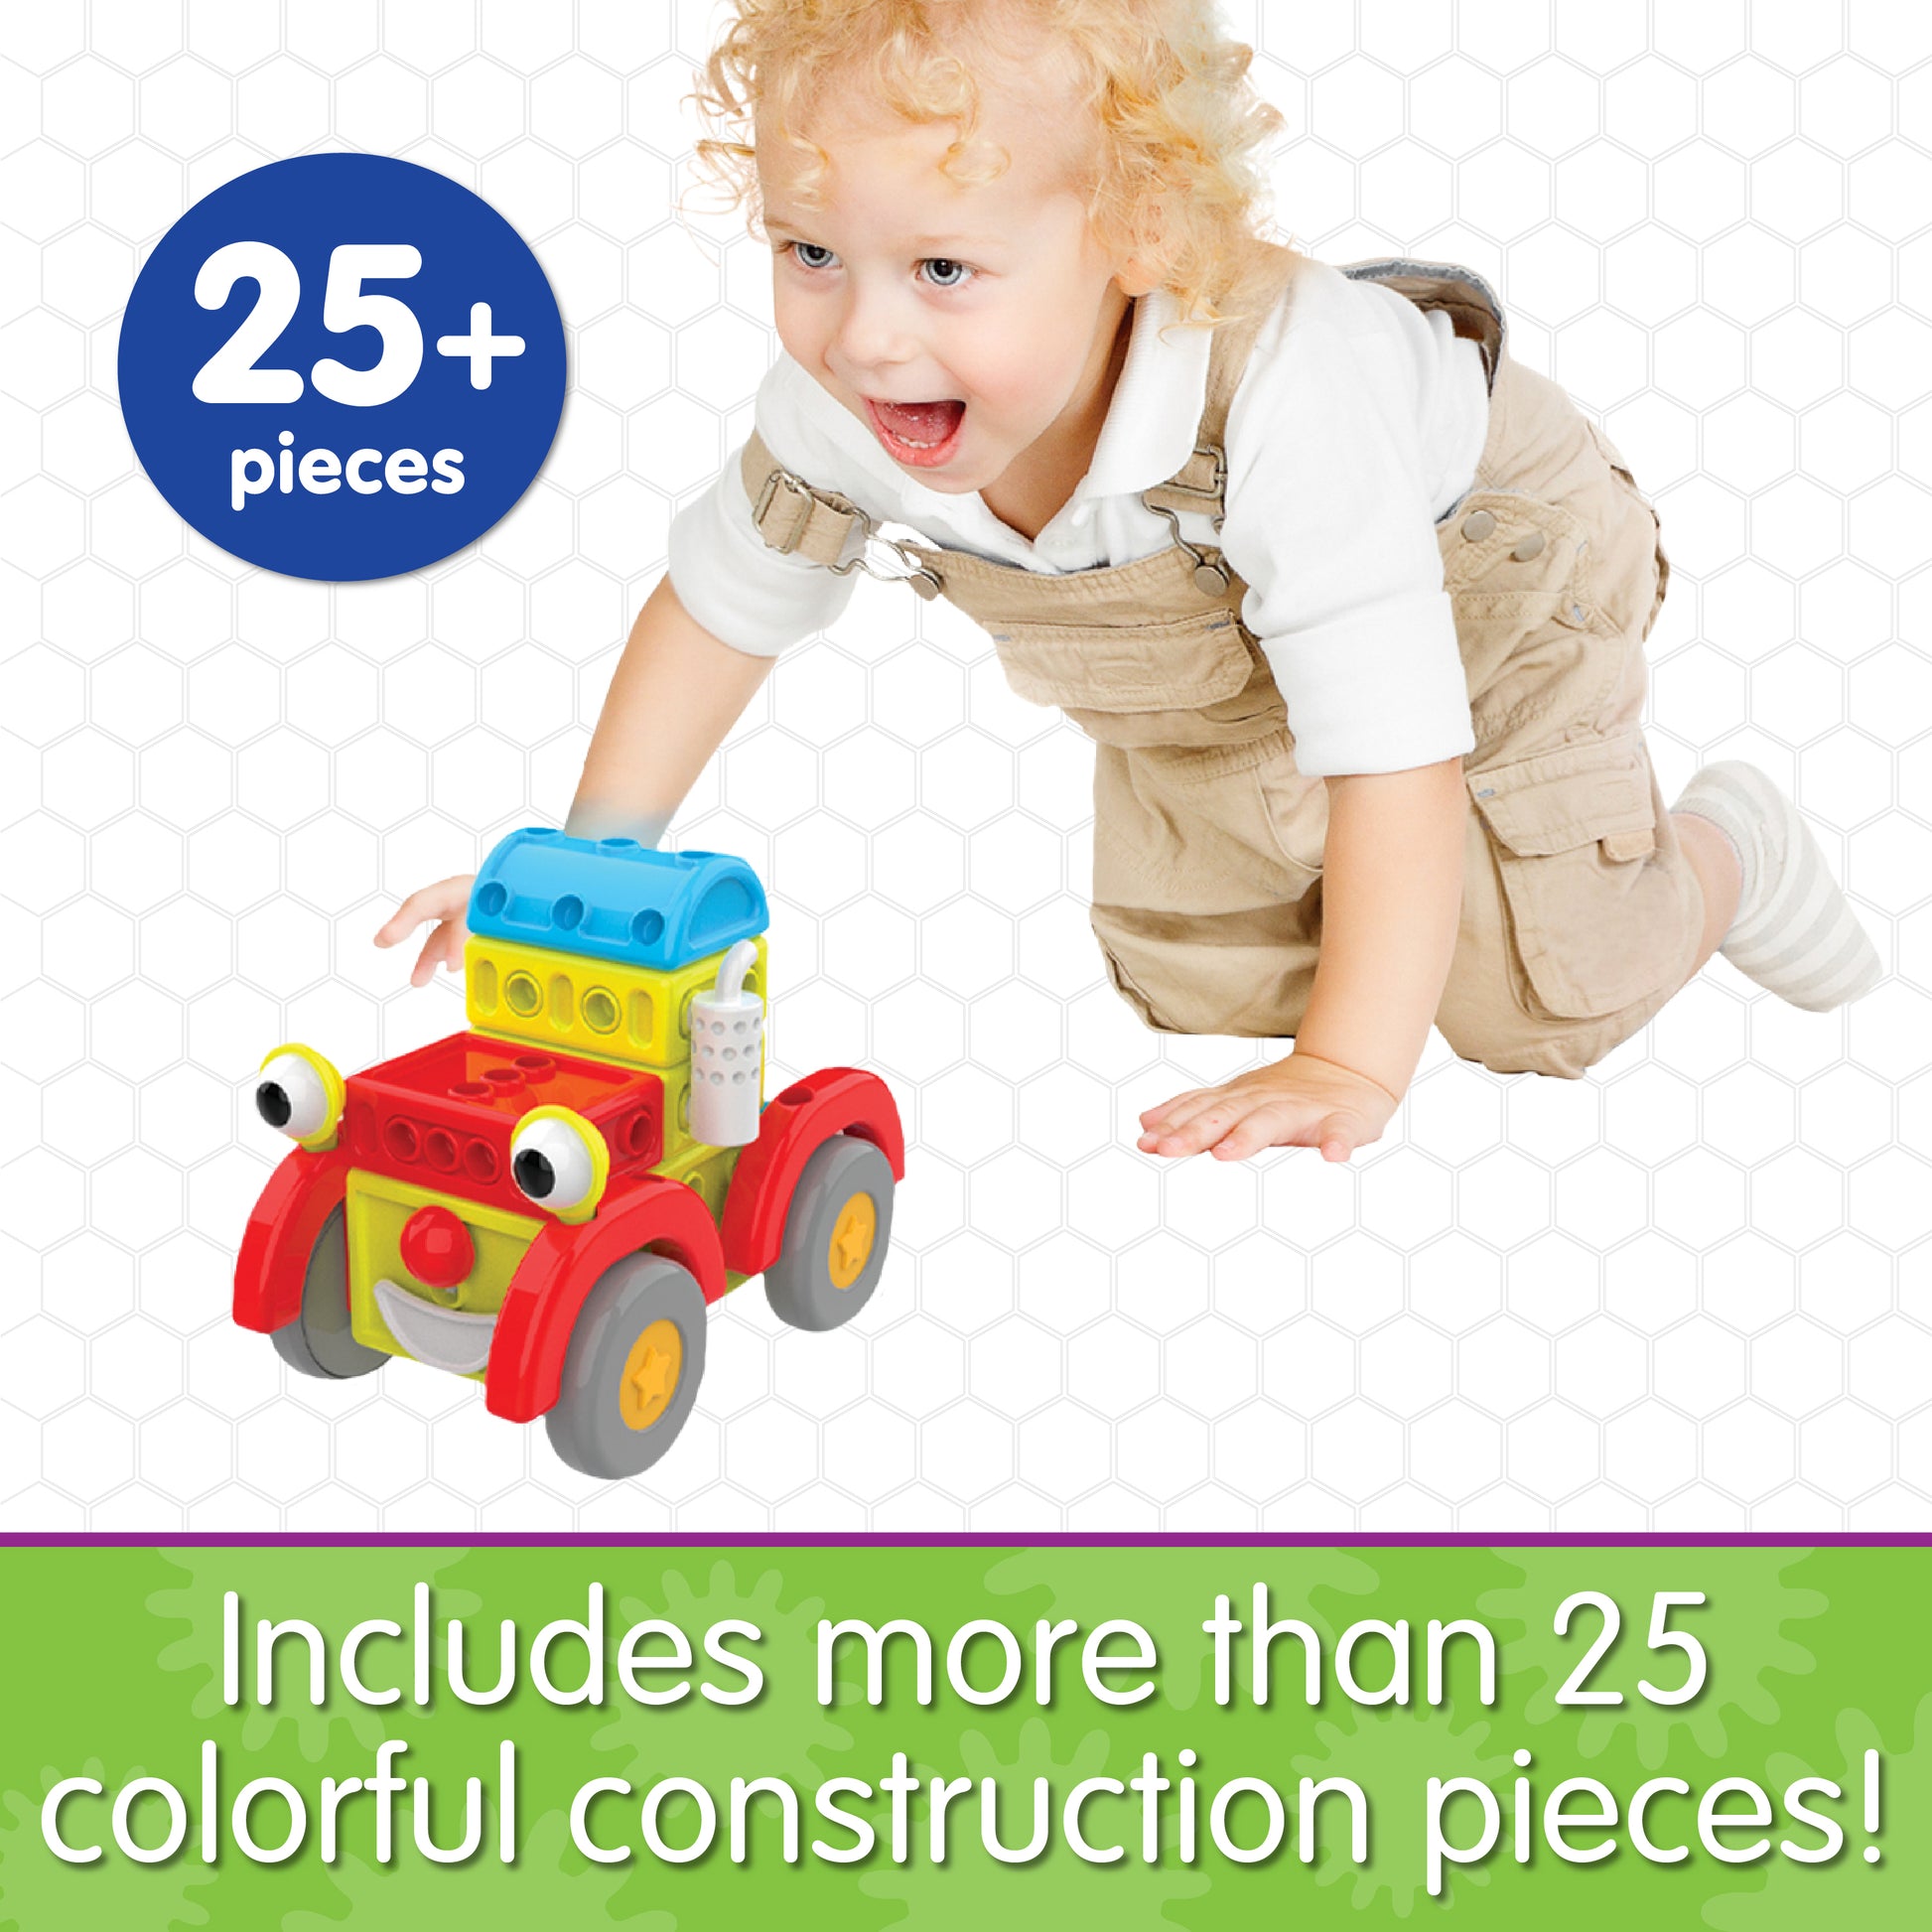 Infographic about Around Town Construction Set that says, "Includes more than 25 colorful construction pieces!"